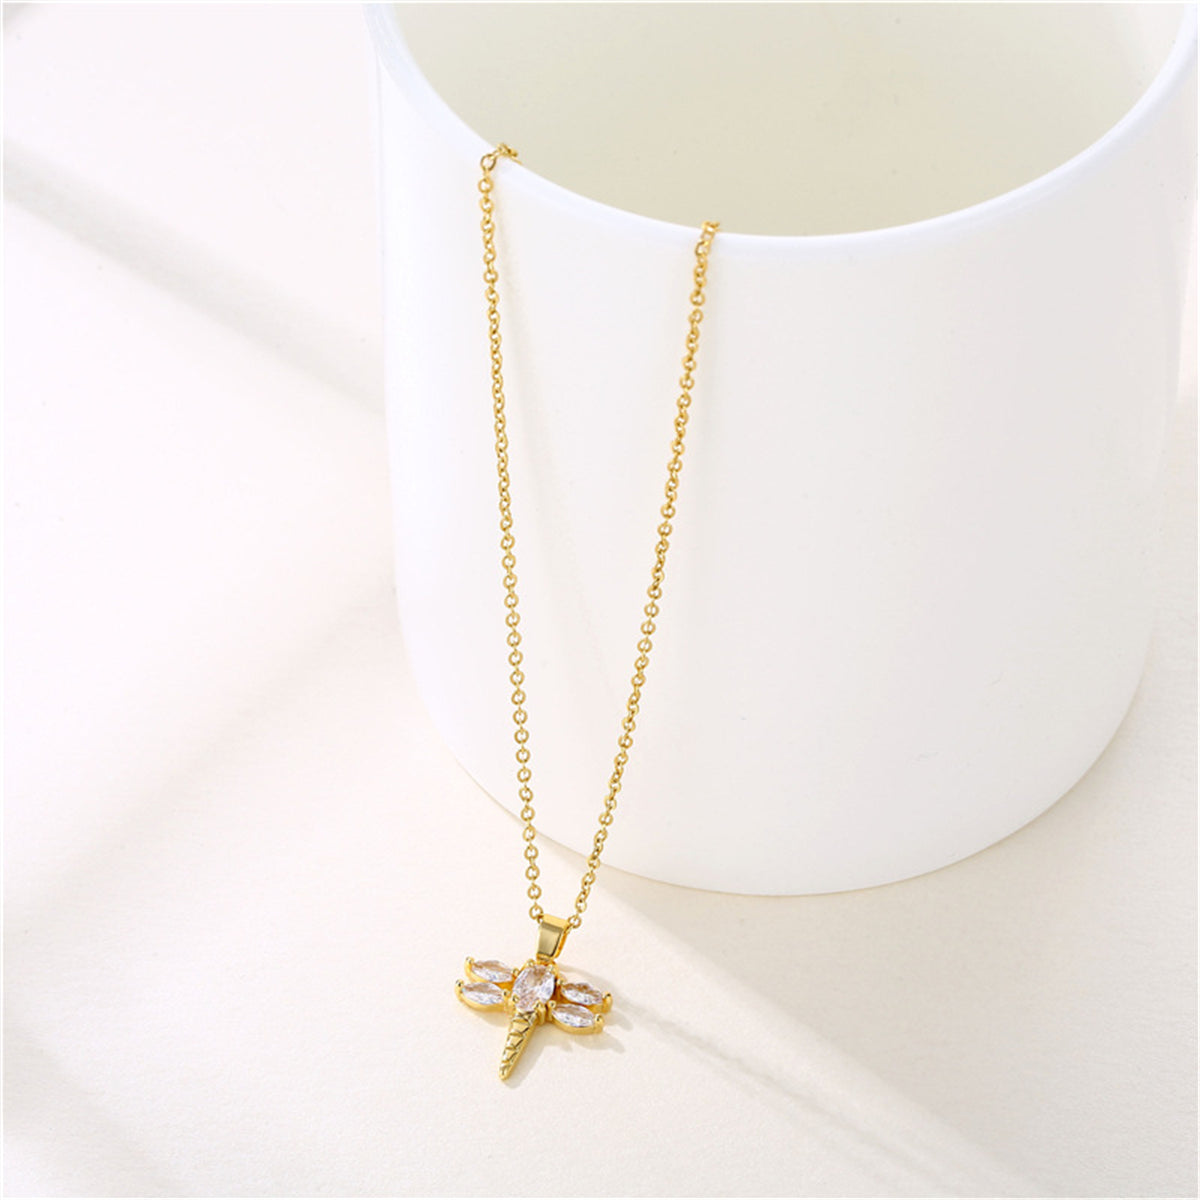 Crystal & 18K Gold-Plated Dragonfly Pendant Necklace